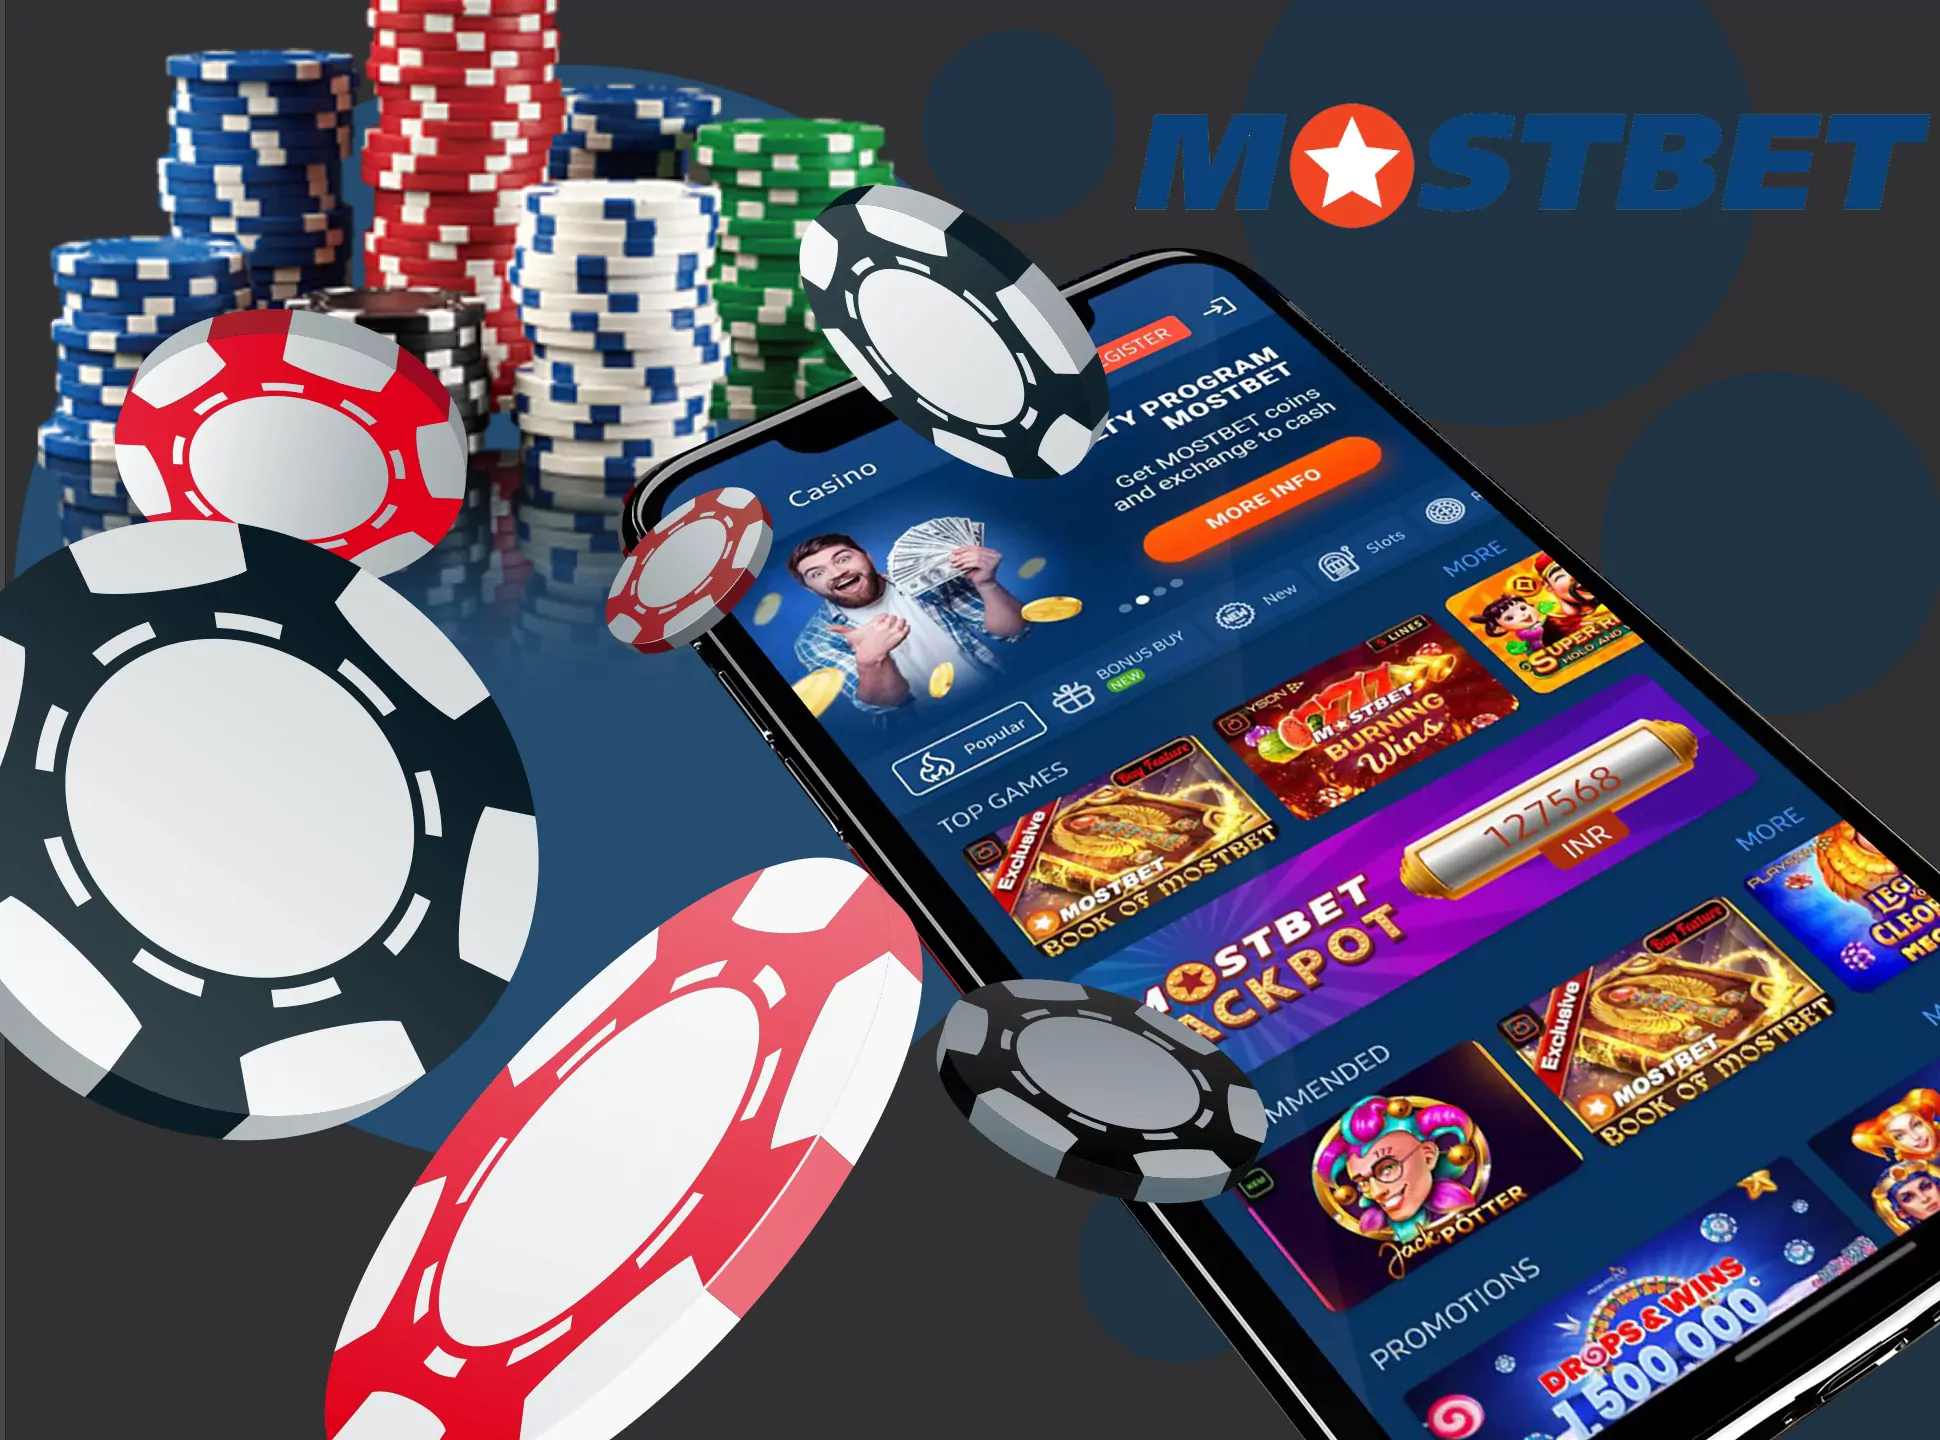 There is also a casino section in the Mostbet app.